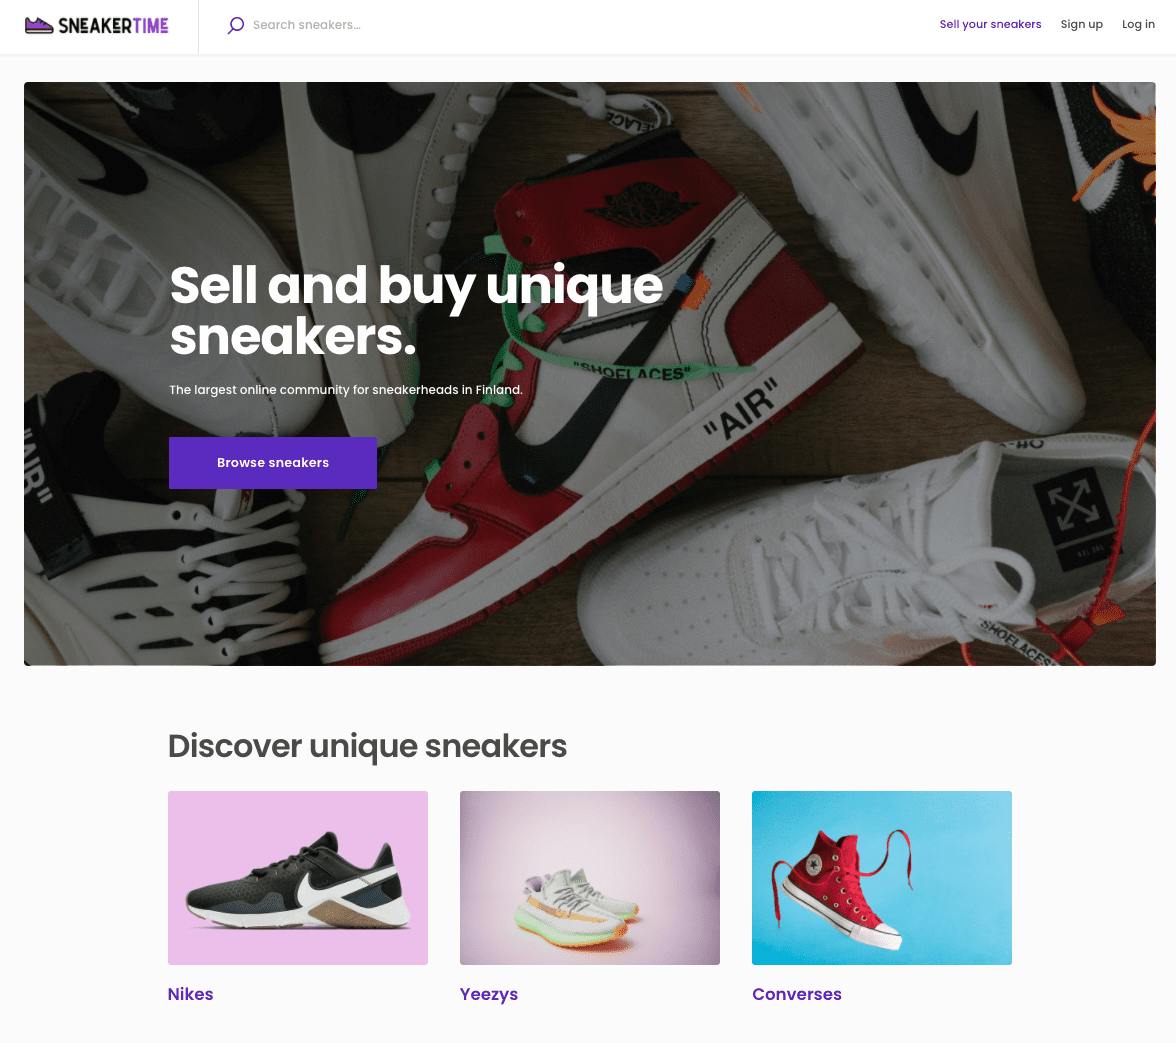 Example of a multi-vendor marketplace landing page.